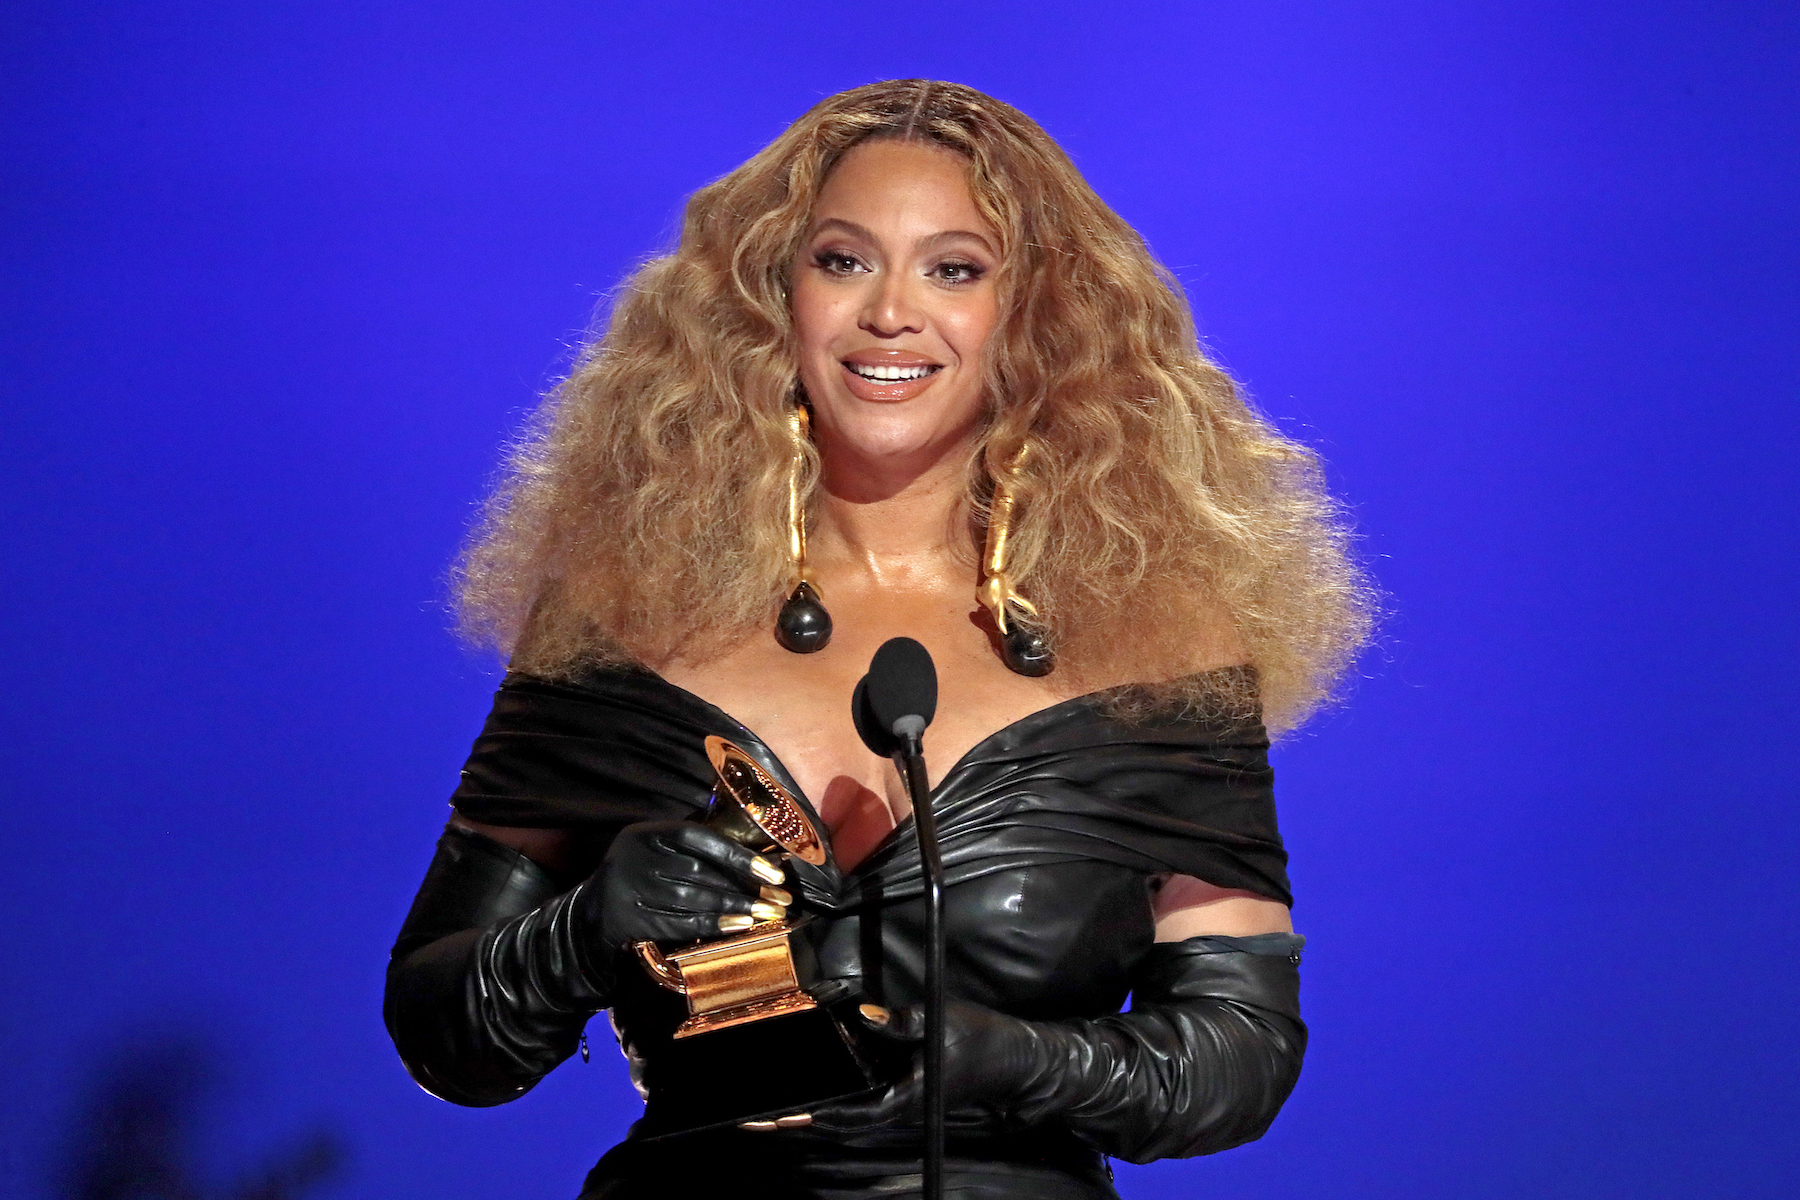 Beyoncé, who reportedly tried to recruit Britney Spears for a music video, holding a Grammy Award